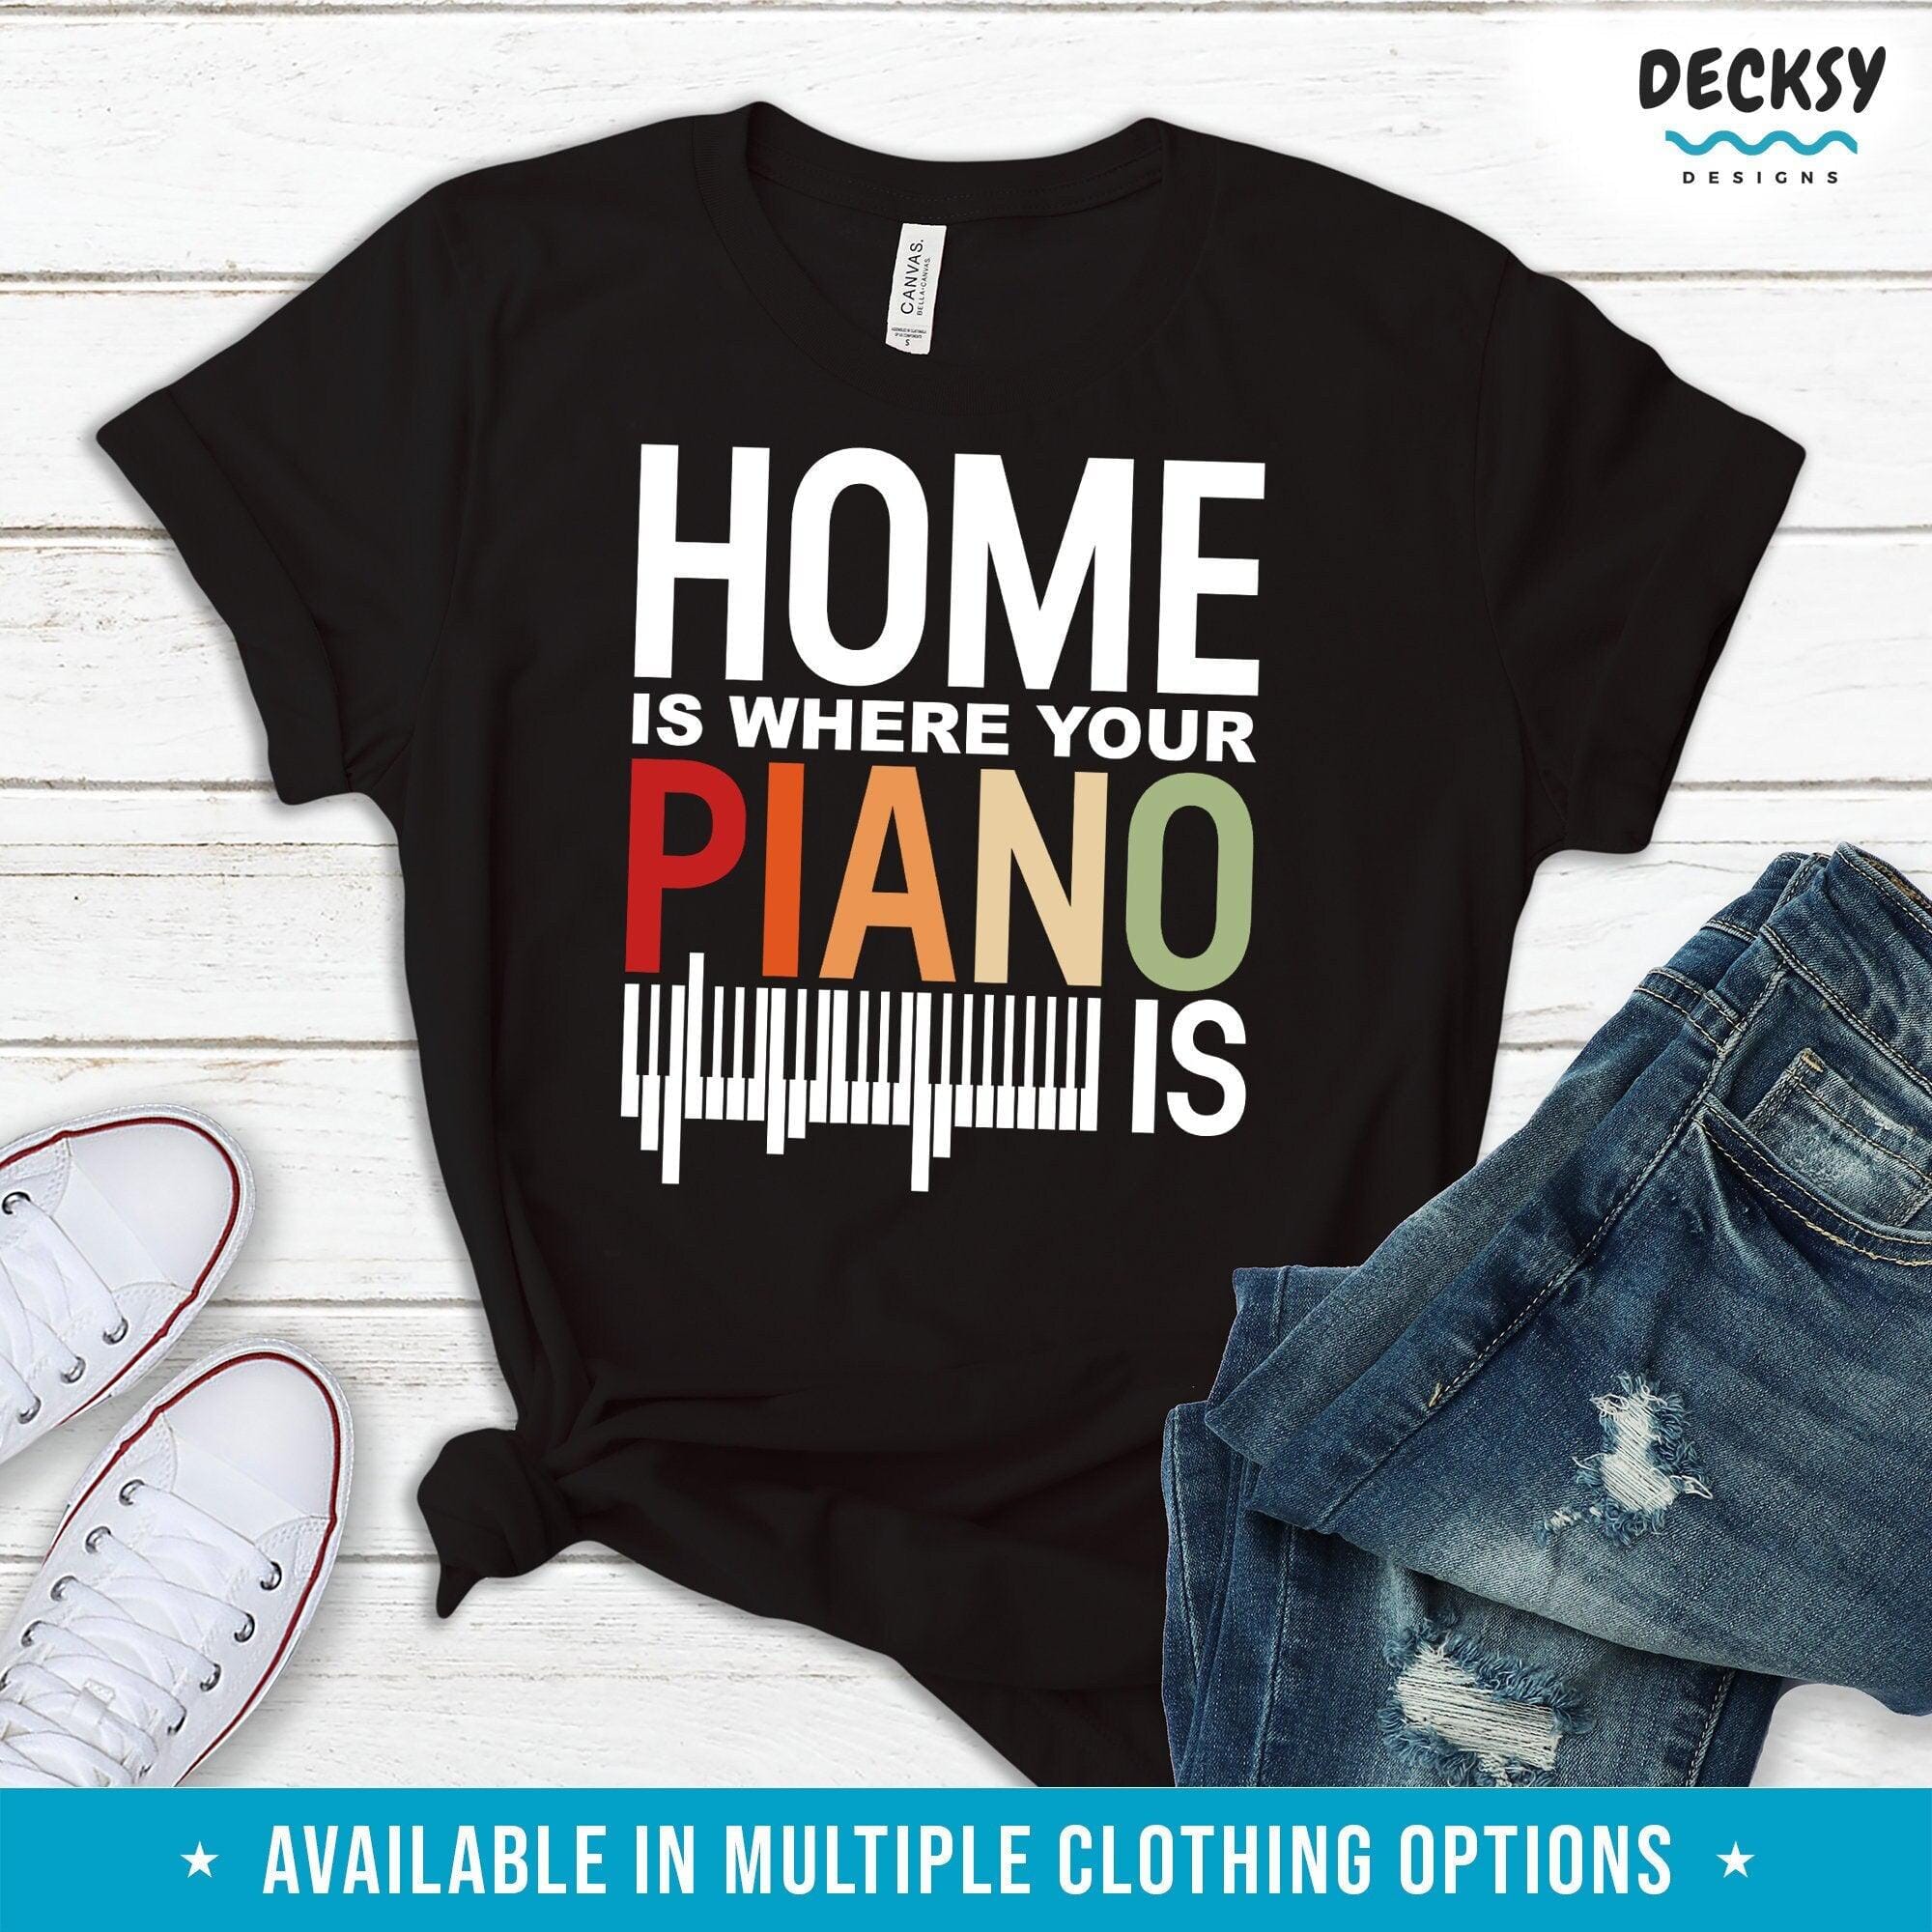 Piano shirt, Pianist Gift-Clothing:Gender-Neutral Adult Clothing:Tops & Tees:T-shirts:Graphic Tees-DecksyDesigns